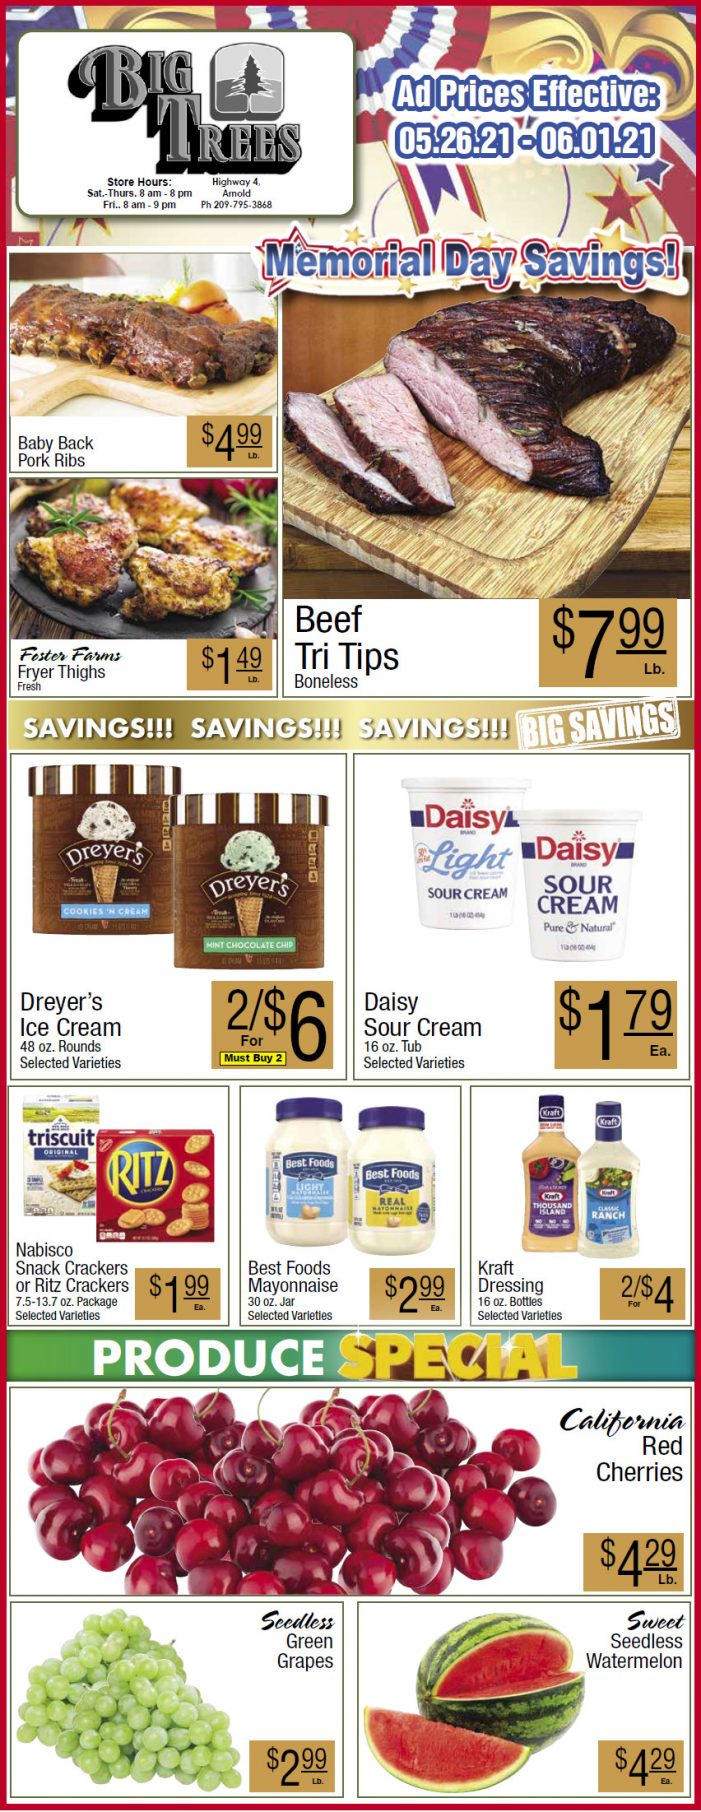 Big Trees Market Weekly Ad & Grocery Specials May 26th Through June 1st!  Shop Local & Save!!